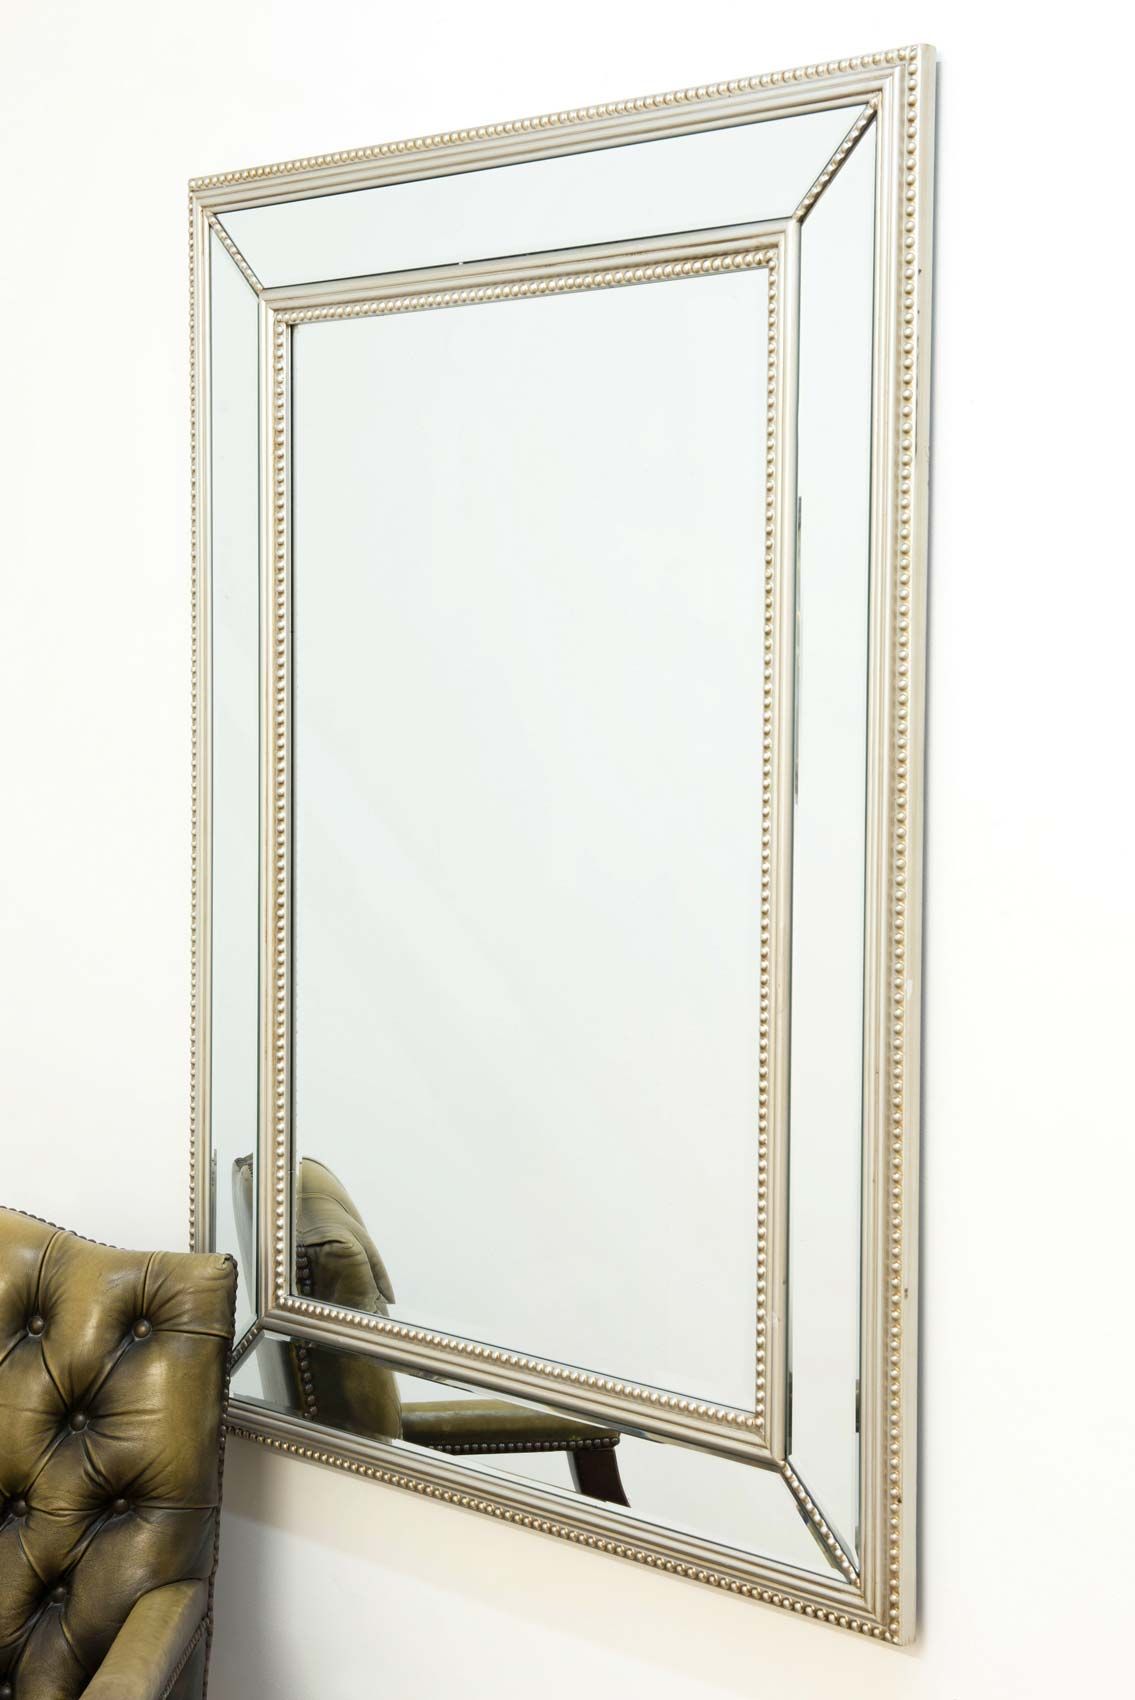 Large Silver Beaded Edge Modern Venetian Wall Mirror 3Ft11 X 2Ft11 Pertaining To Silver Beaded Square Wall Mirrors (View 4 of 15)